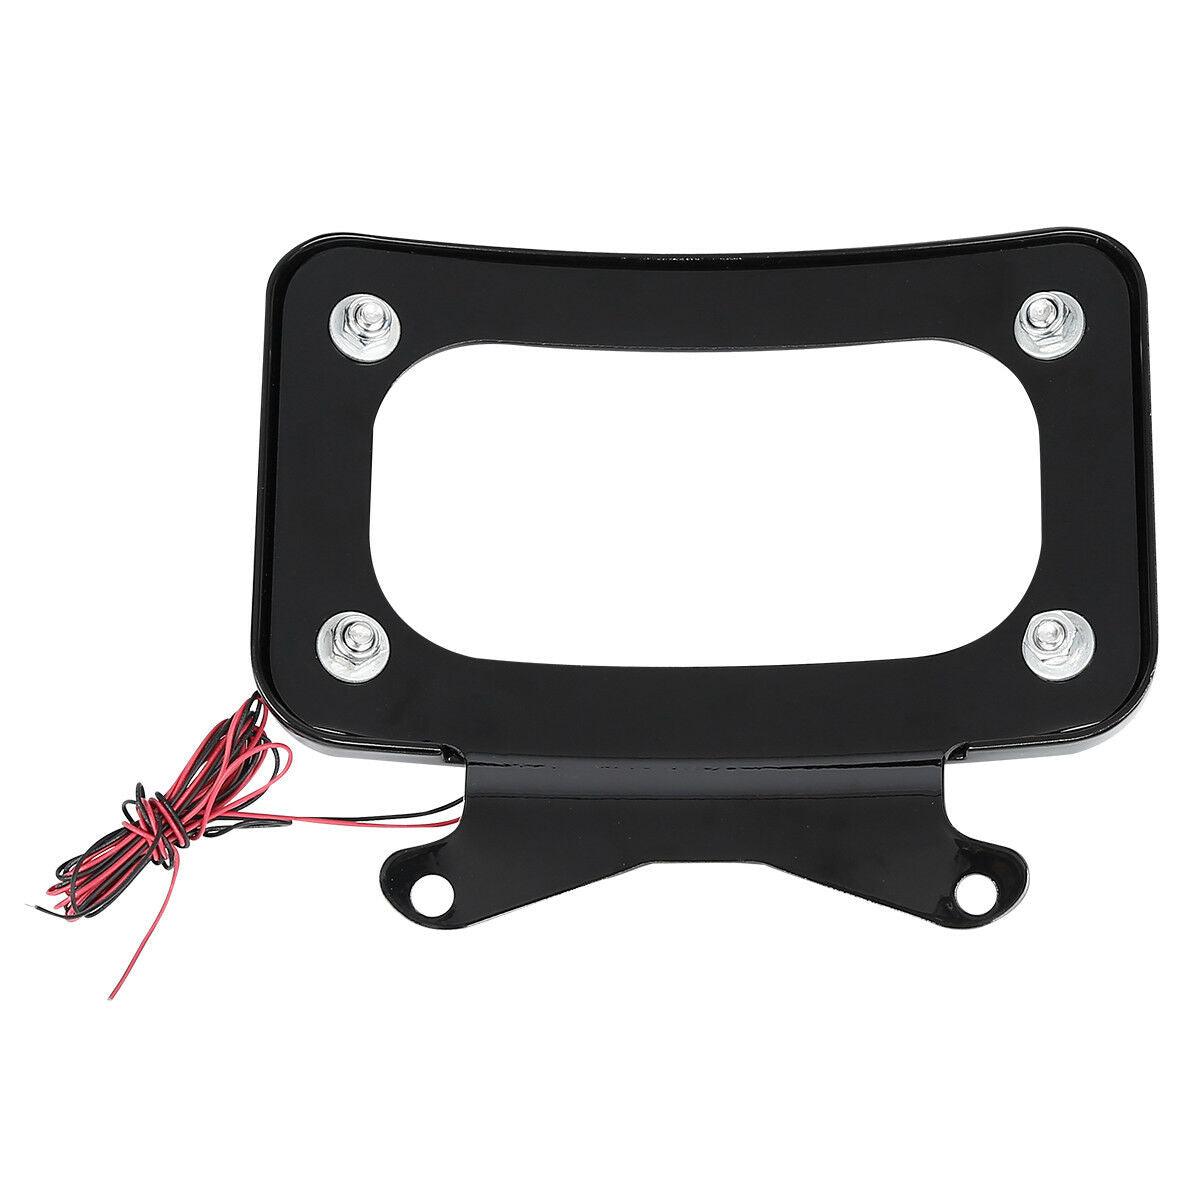 Black Curved License Plate Frame W/ LED Light Fit For Harley Touring Road Glide - Moto Life Products